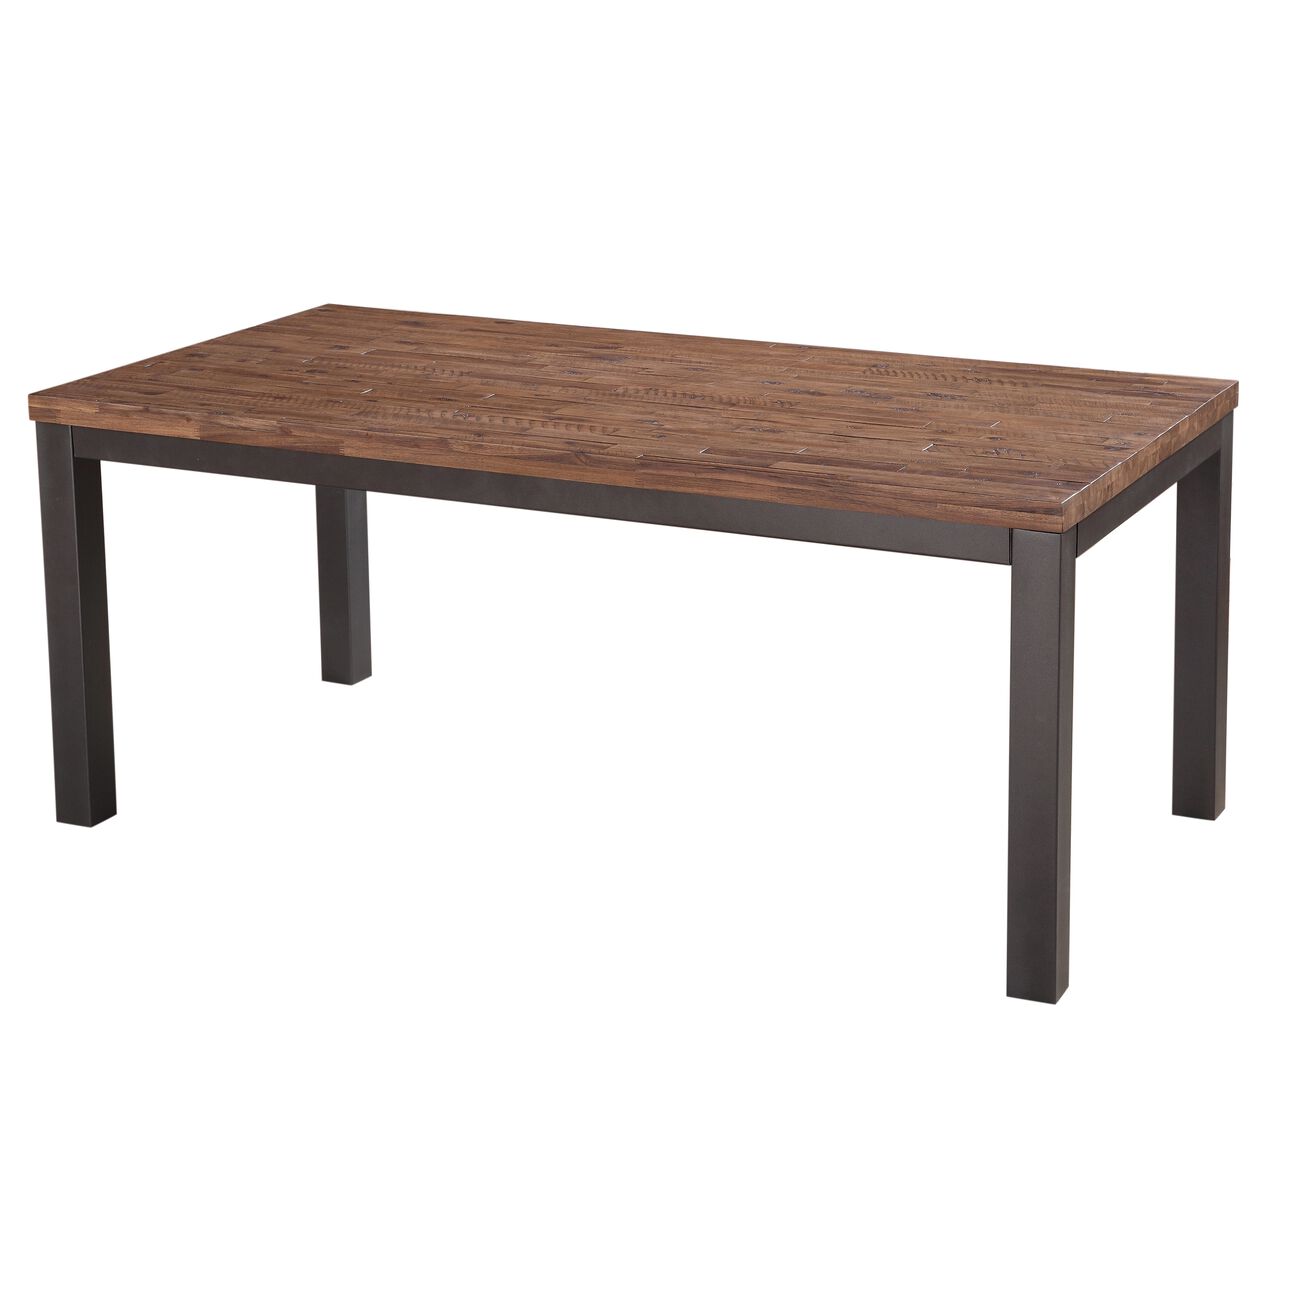 Wooden Rectangular Table with Gray Powder Coated Steel Base, Rustic Truffle Brown